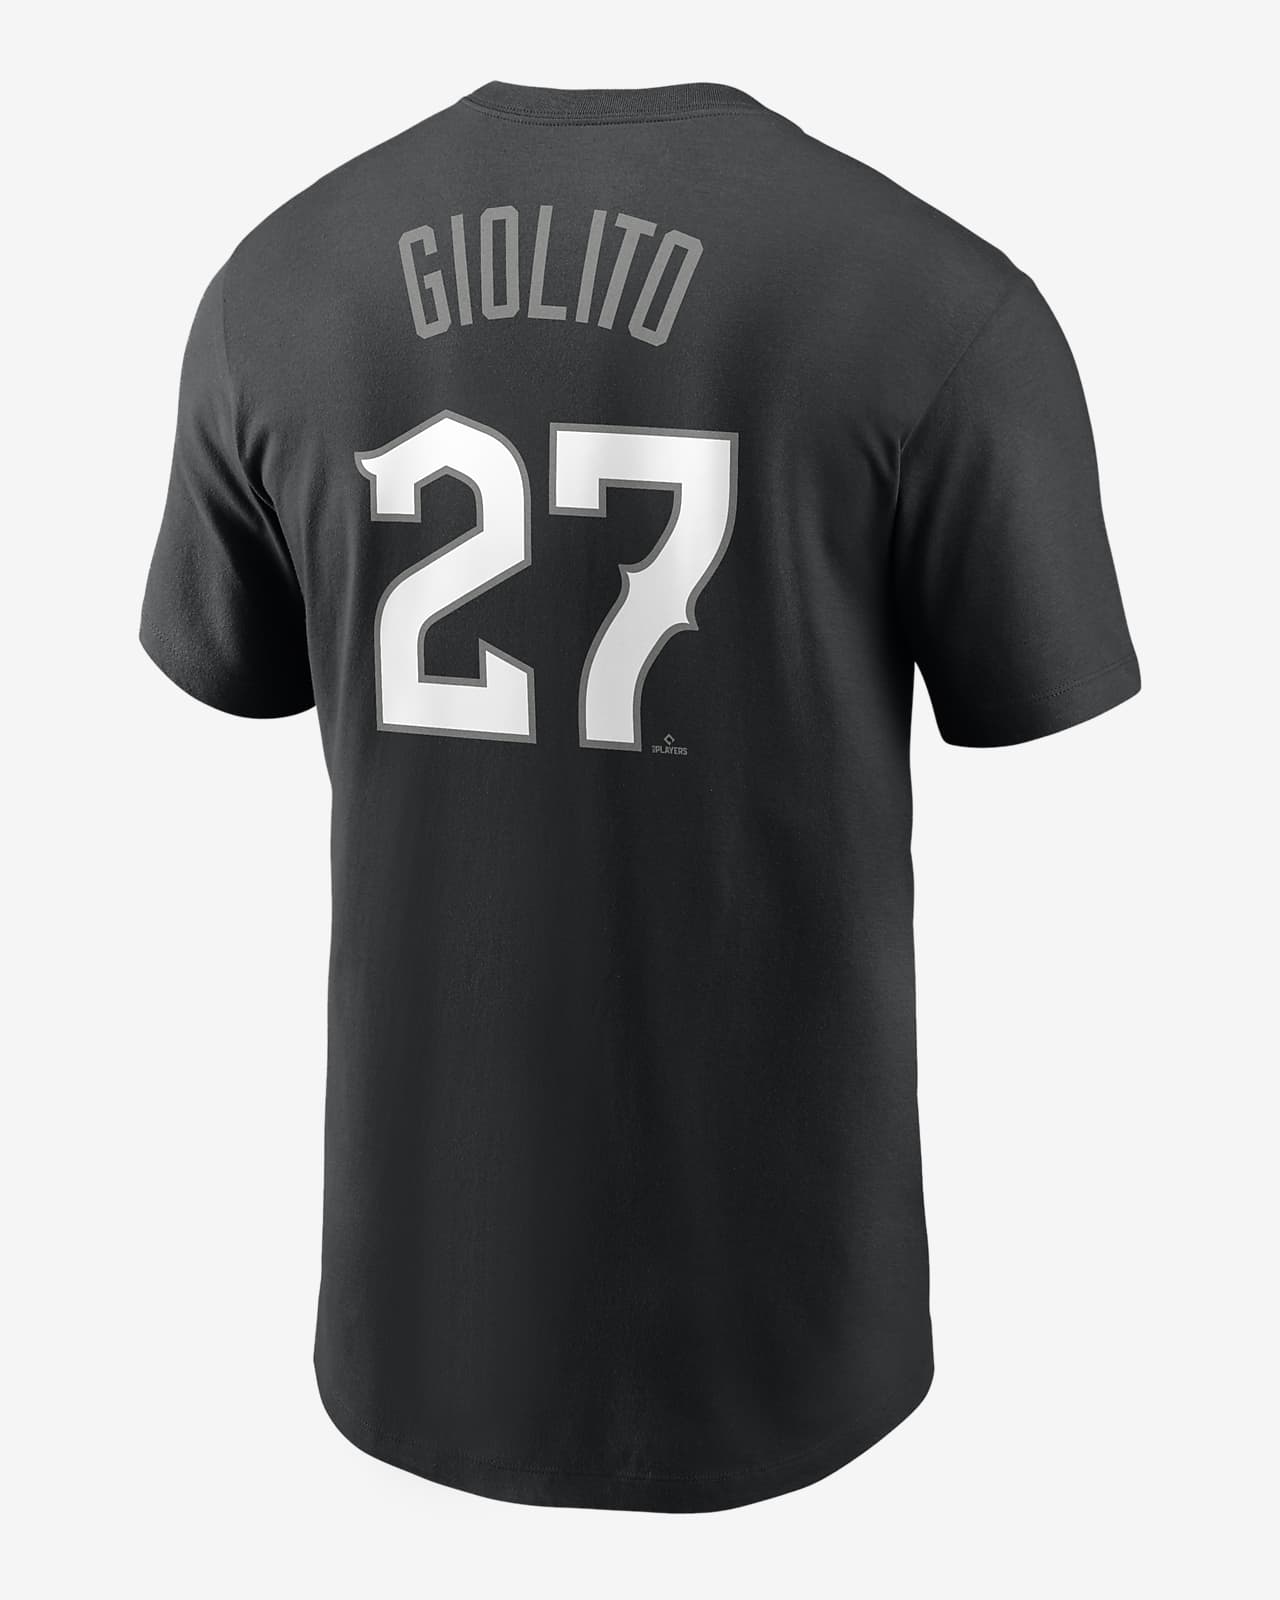 new white sox jersey southside